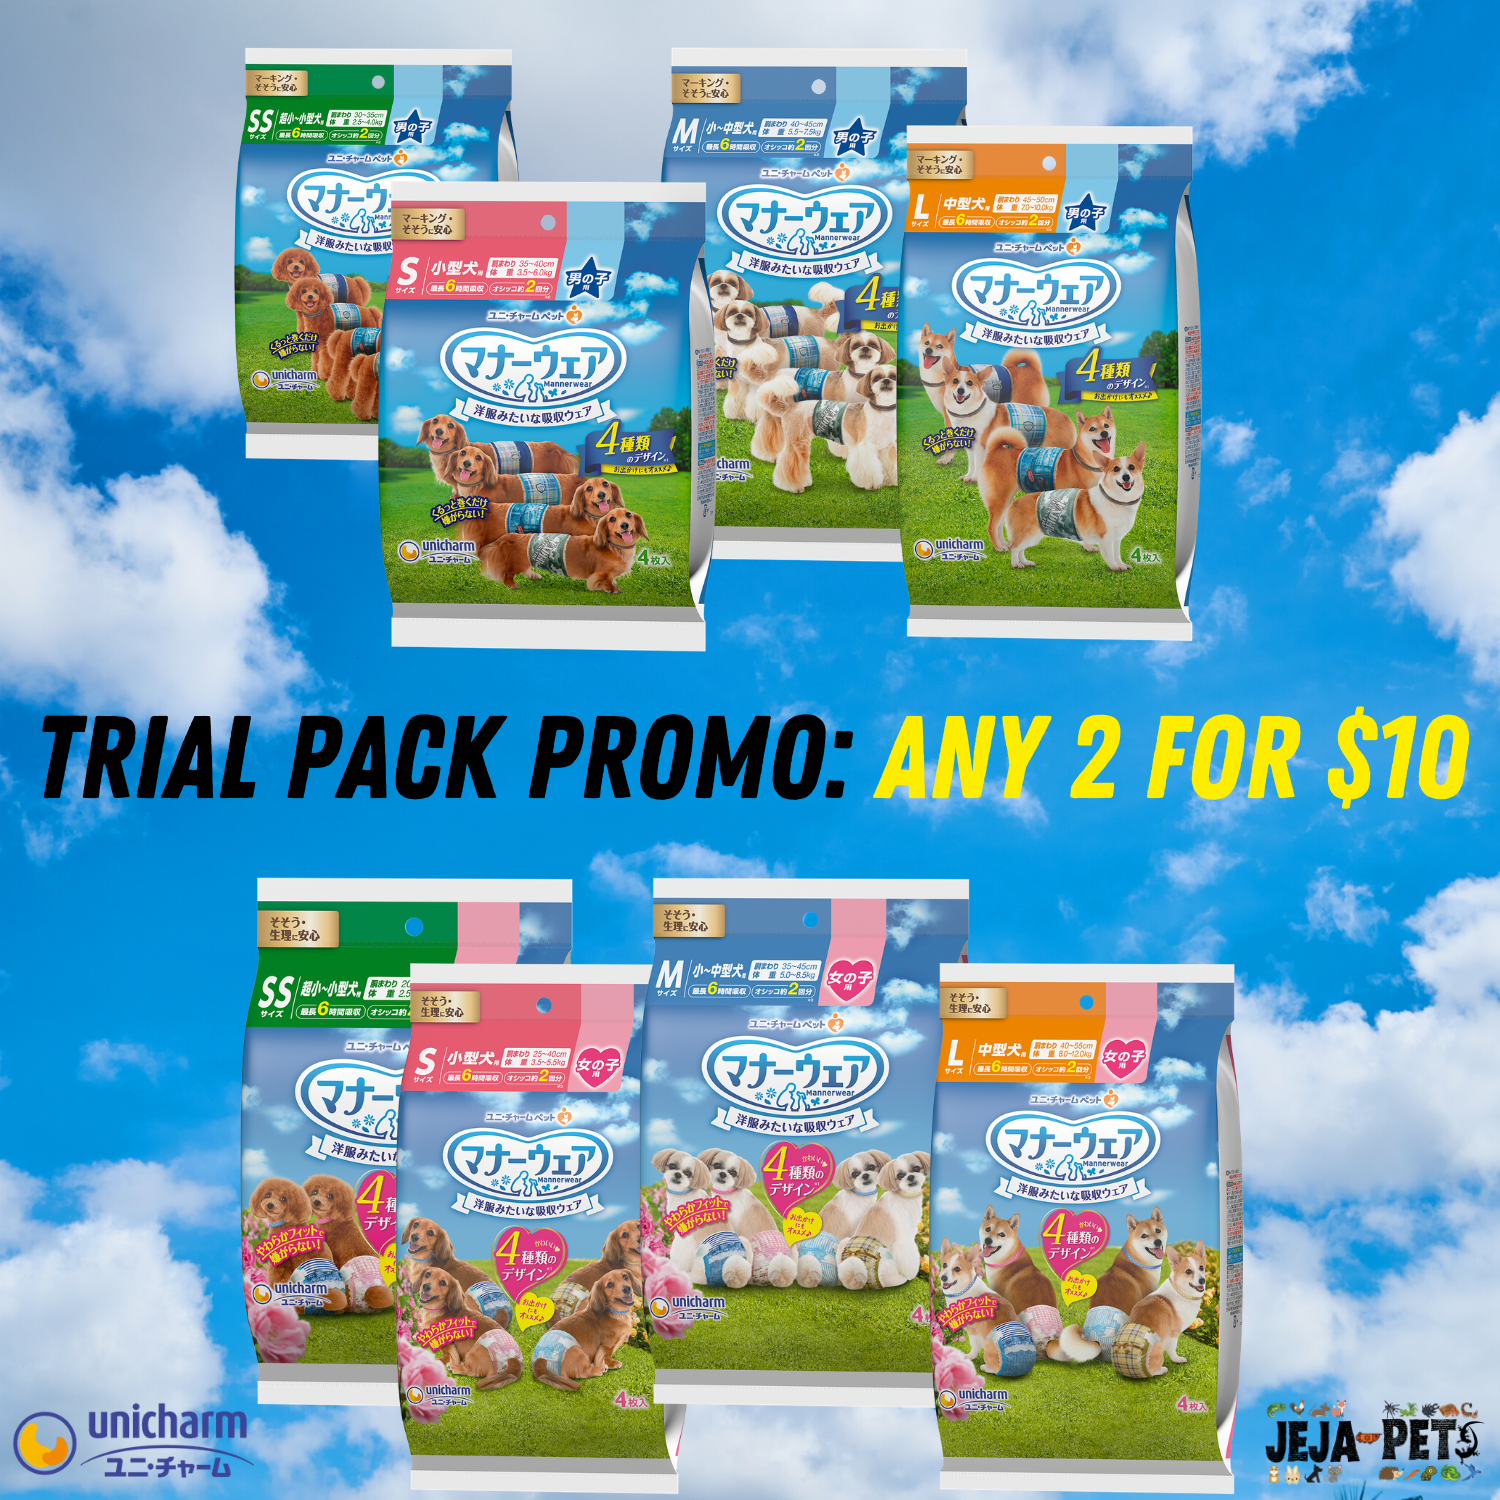 [TRIAL PACK PROMO: ANY 2 FOR $10] Unicharm Manner Wear Dog Diaper Trial Pack (Male & Female) - SS / S / M / L